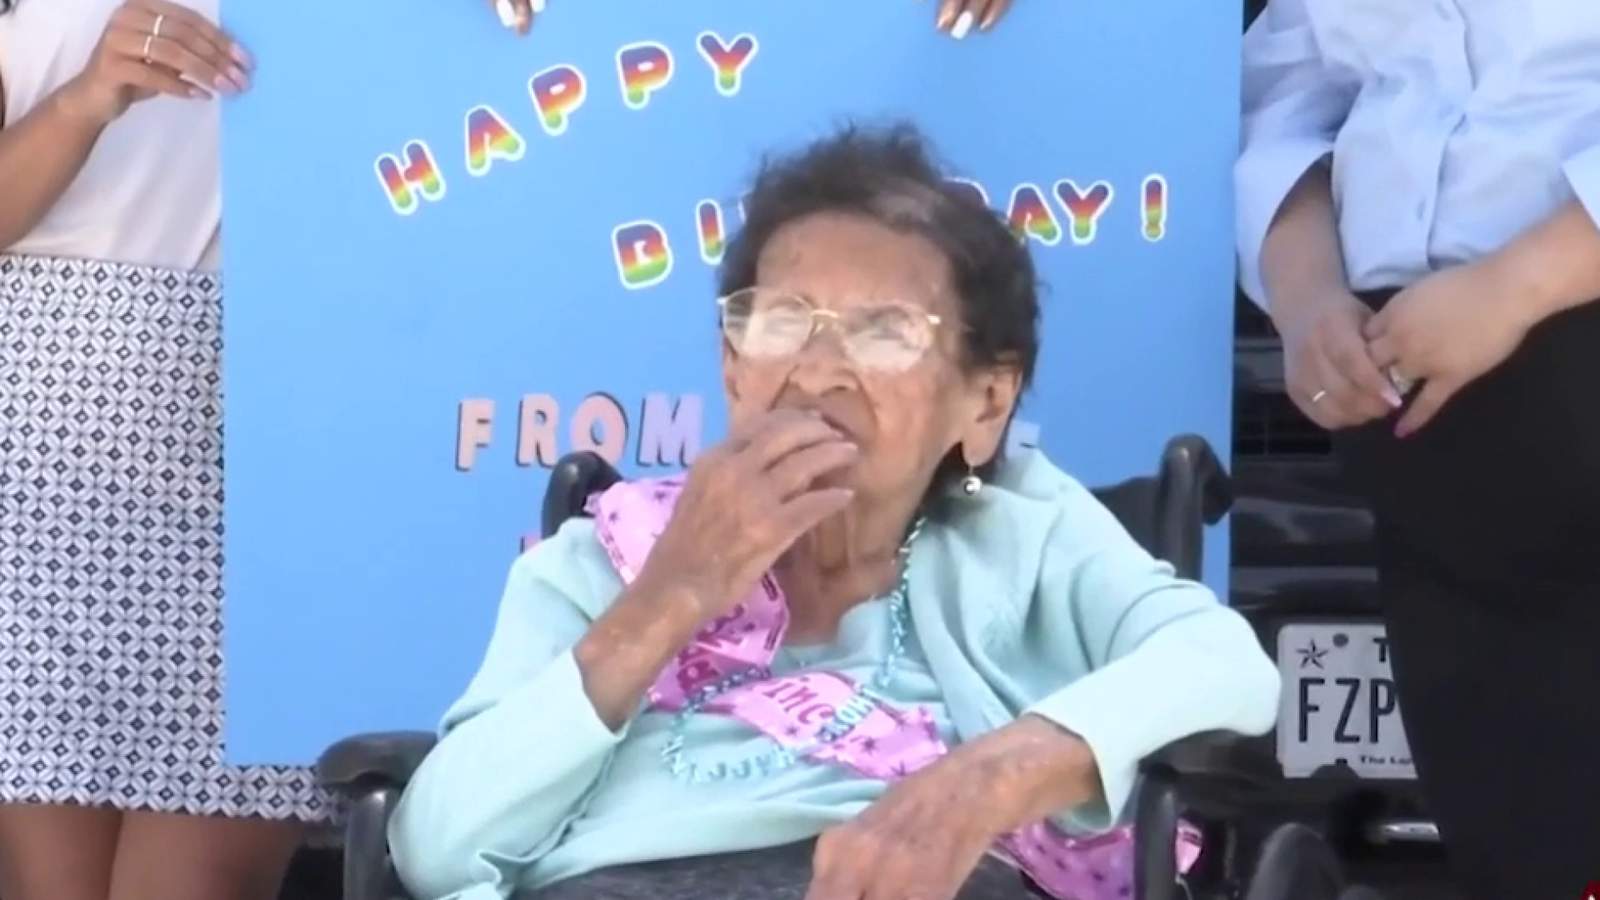 WATCH: Family surprises loved one with car parade on 104th birthday